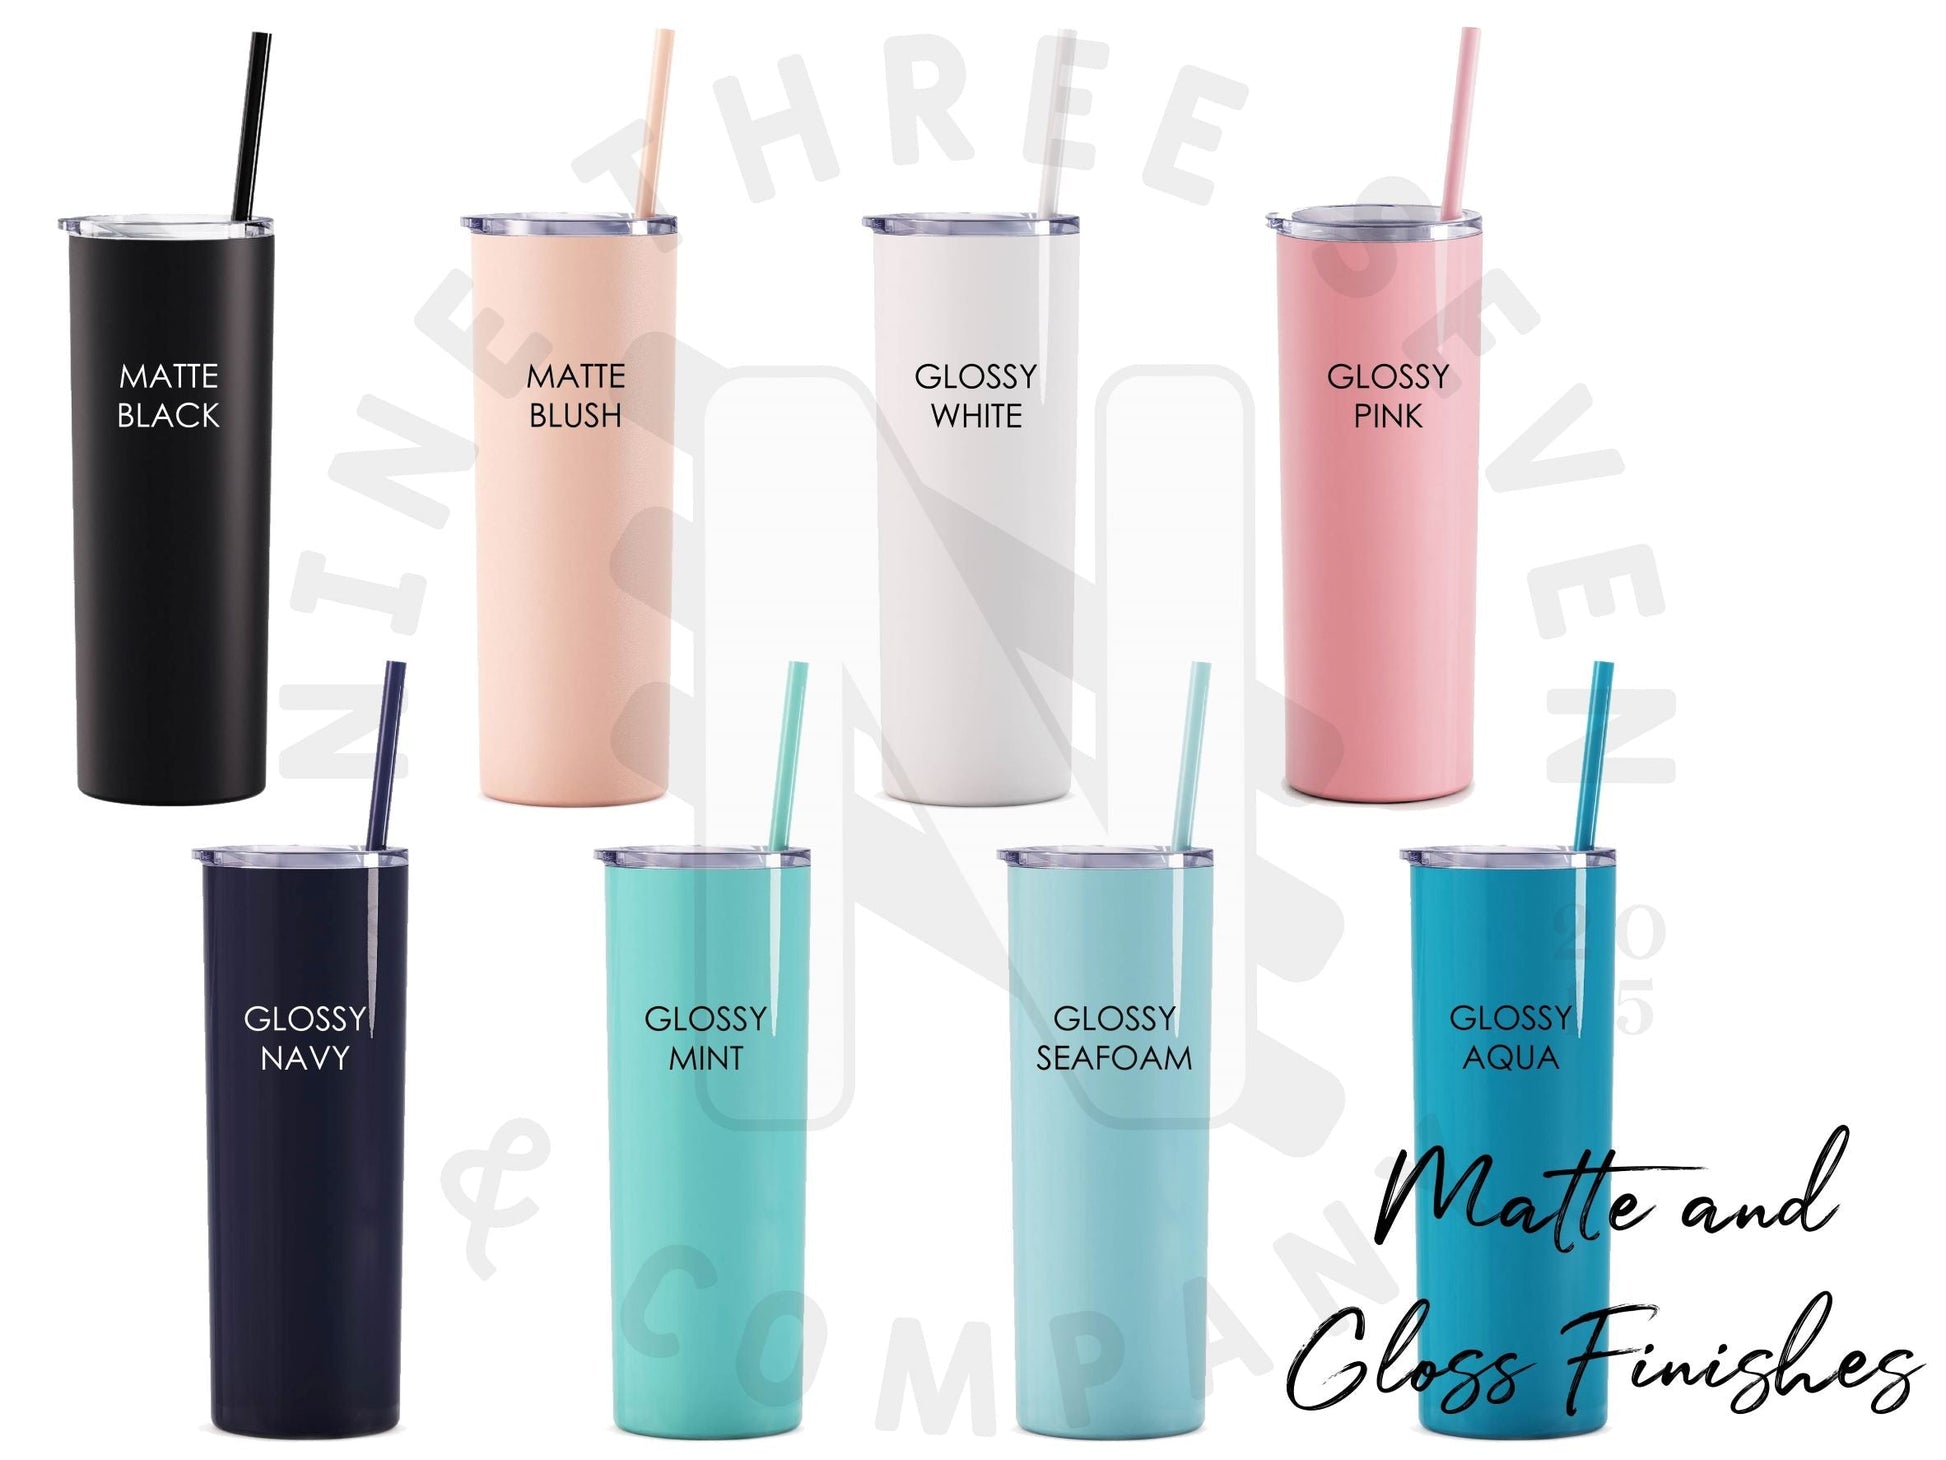 Custom Tumbler, Please Message Me First. Available in Wine/modern/fatty/skinny  Tumbler With Lid & Straw. 